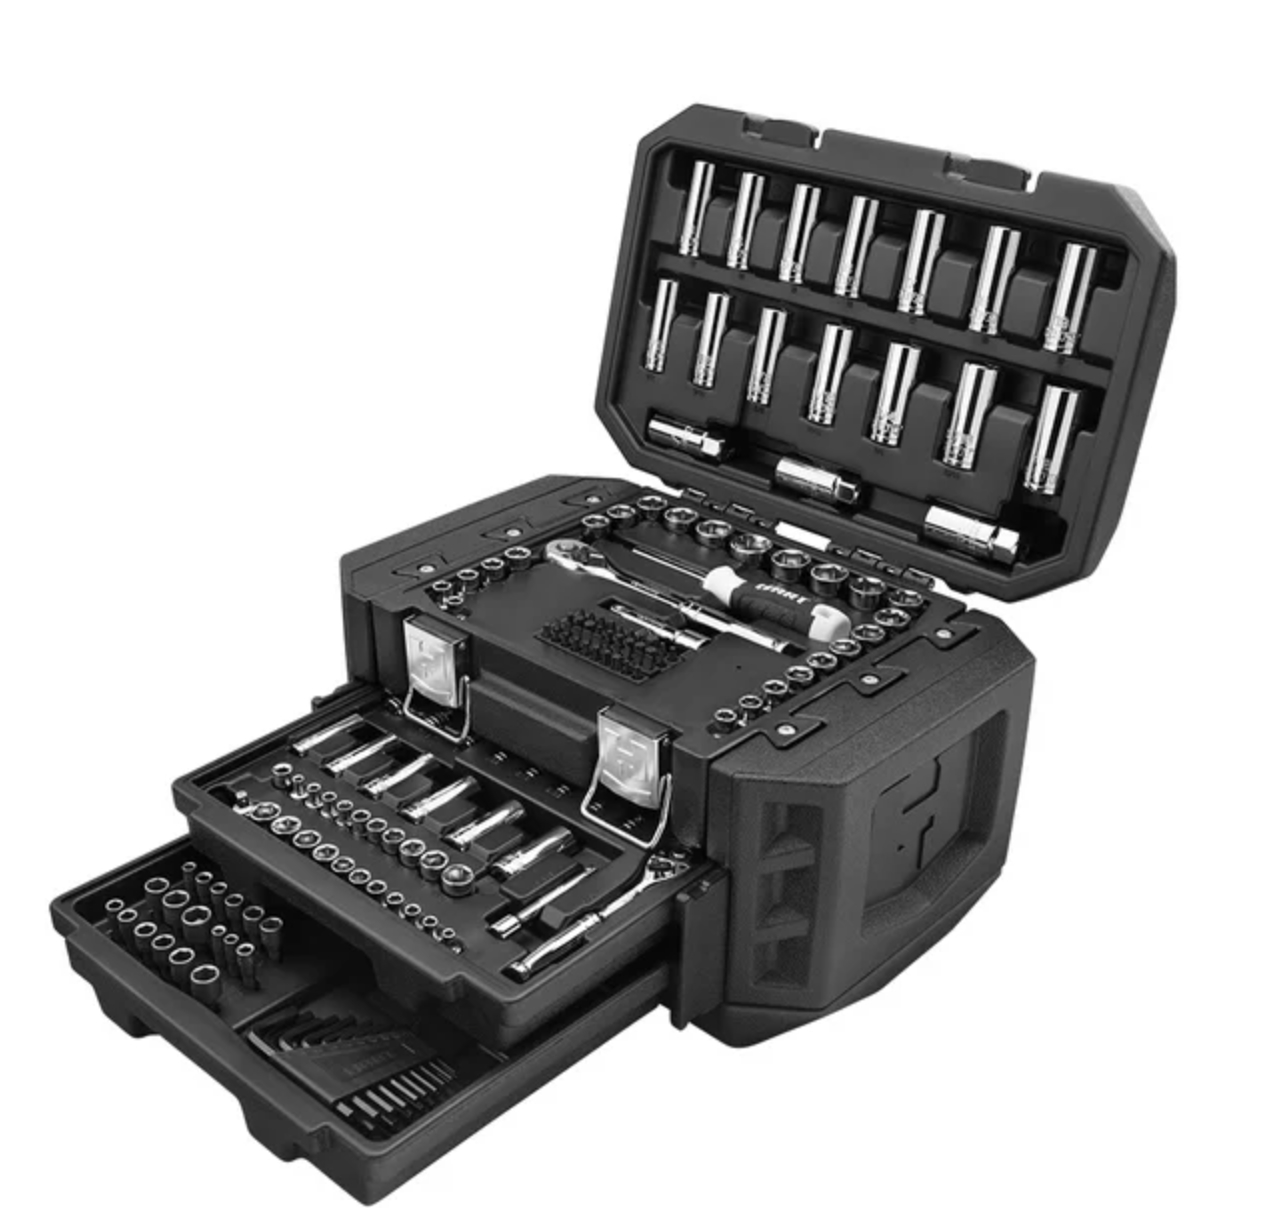 Open toolbox with various sizes of sockets and wrenches neatly organized in slots